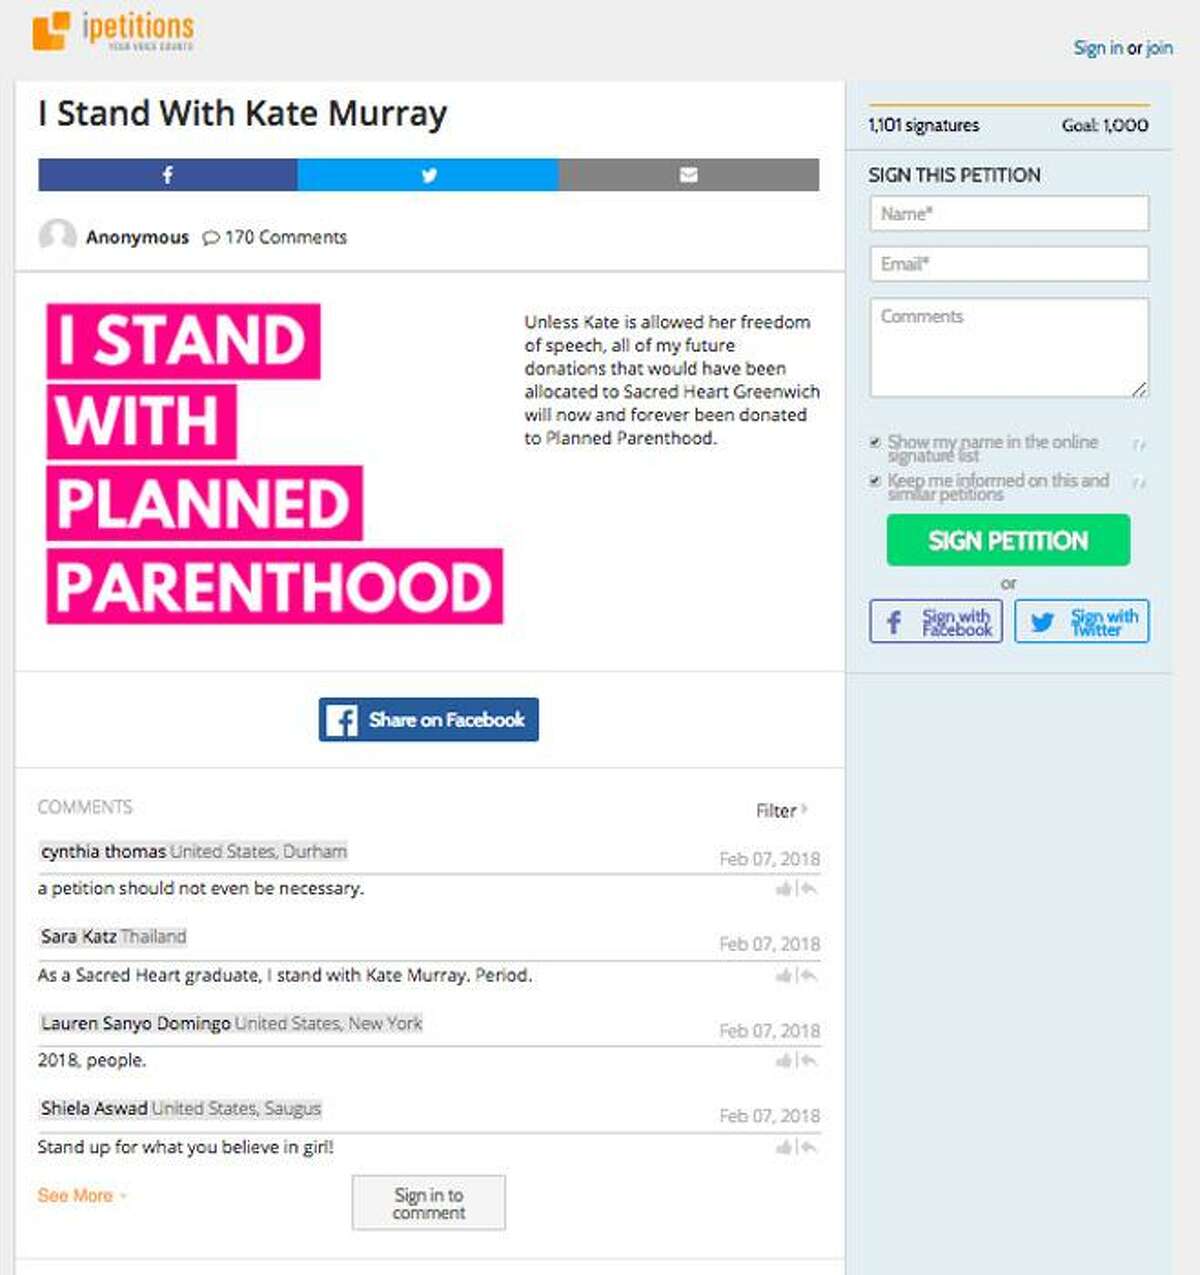 Sacred Heart Greenwich threatens to bar student over Planned Parenthood sticker A sophomore at Sacred Heart Greenwich got caught in hot water when the Catholic school threatened to revoke her enrollment unless she removed a "I Stand with Planned Parenthood" sticker from her laptop. Kate Murray's family and a slew of alumni came to her defense, saying she was entitled to share her political opinion. However, these individuals also stated that the school also promoted free speech, but only if it aligned with their beliefs.A petition was started to keep Murray at the school, with the support of the likes of then Gubernatorial candidate Ned Lamont. After a divisive battle, the school allowed Murray to stay at school, and keep her Planed Parenthood sticker on her laptop. Read more.Follow the whole story in the links below: After sticker, group will examine speech at Sacred Heart Greenwich | Student and her sticker allowed to return to Sacred Heart Greenwich | Planed Parenthood sticker causes divide